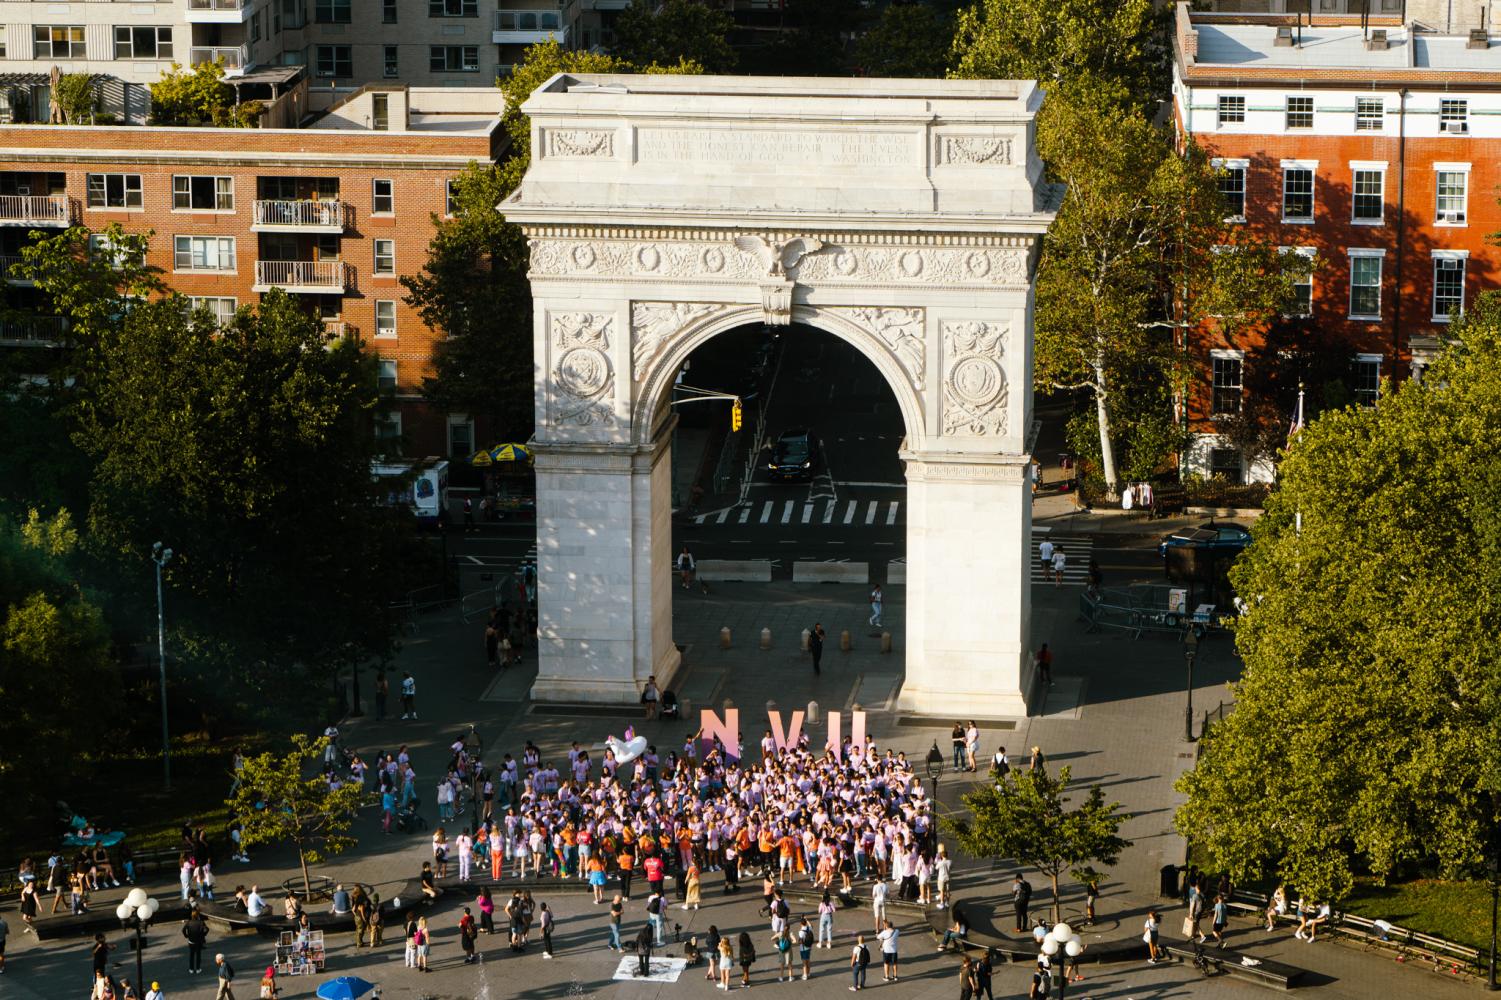 An aerial view of the Washington Square Arch with a crowd of NYU students wearing purple outfits in the background and holding up giant NYU letters.